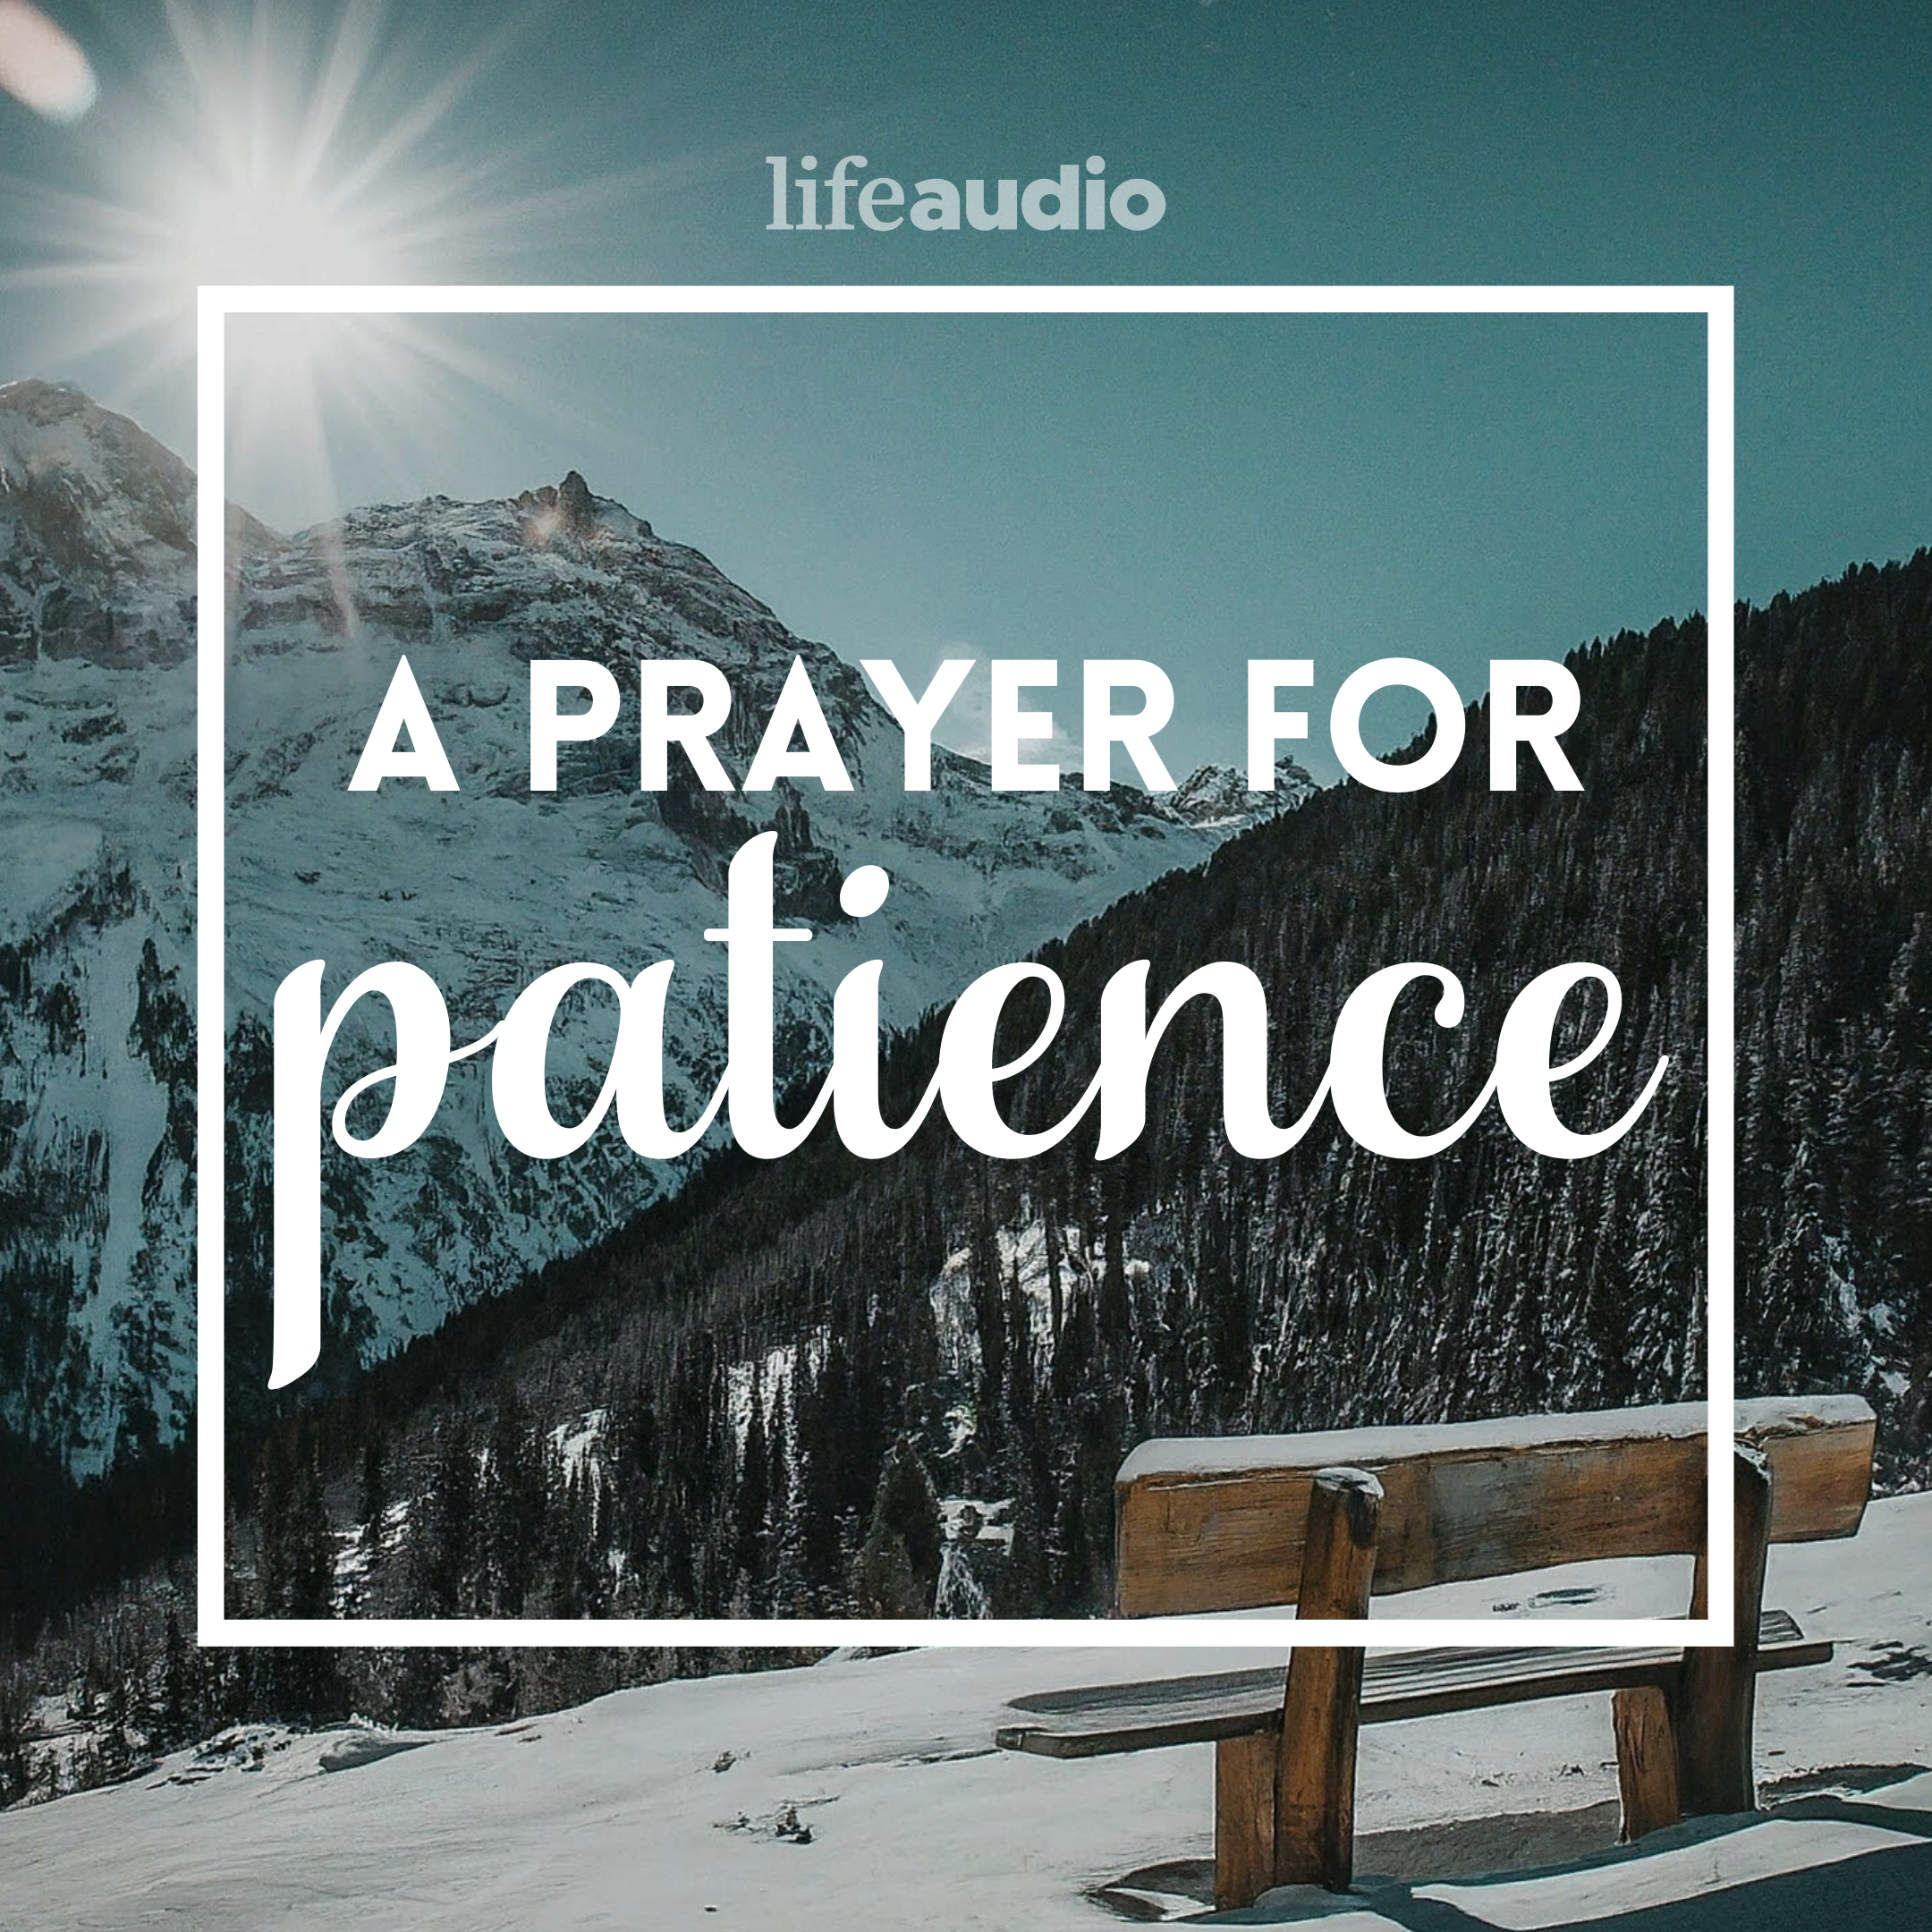 A Prayer for Patience